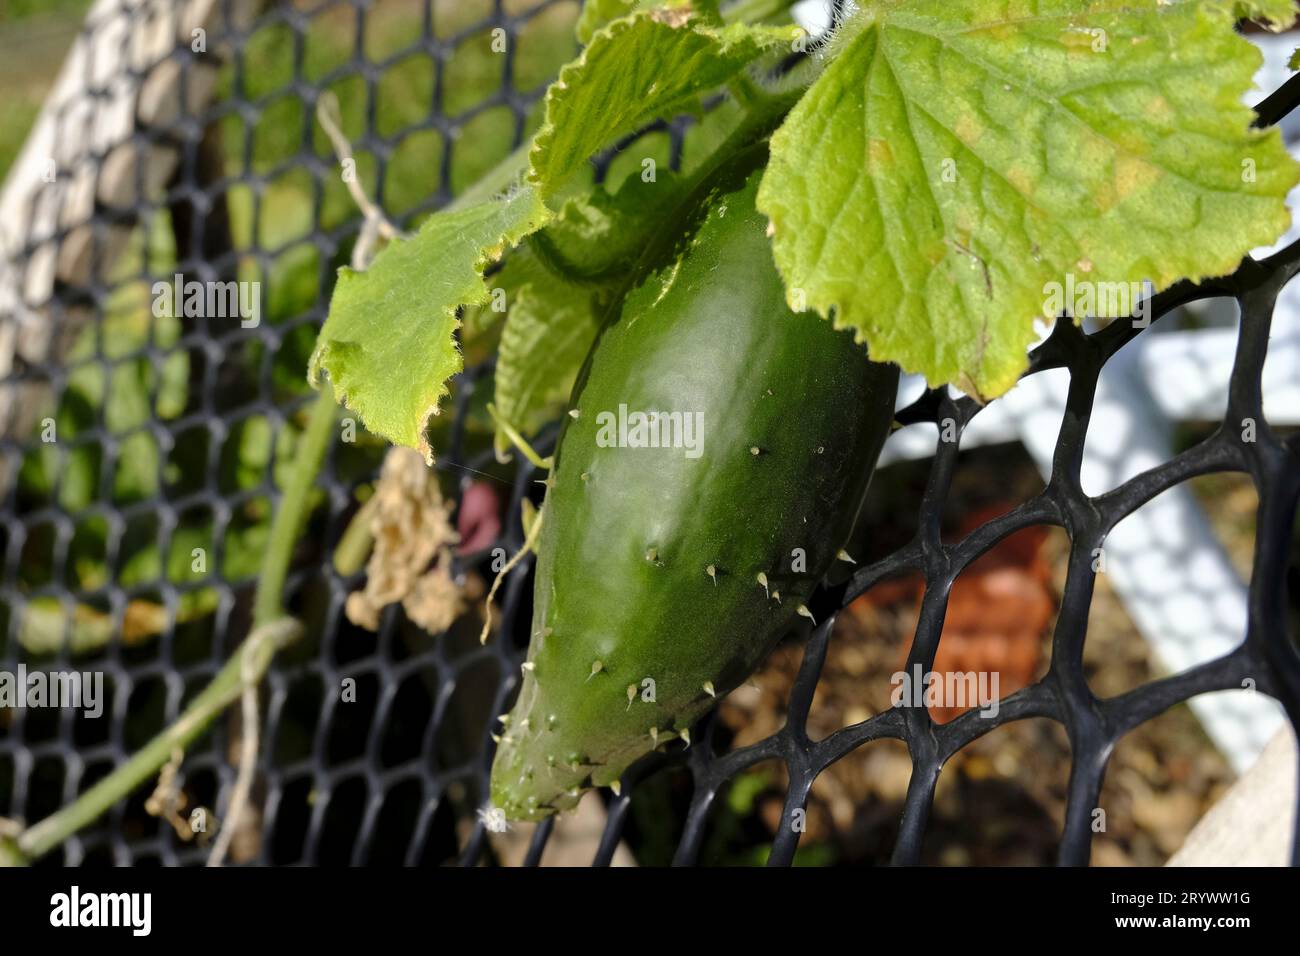 Small and slightly misshapen Cucumber growing on plant in late Summer season Stock Photo